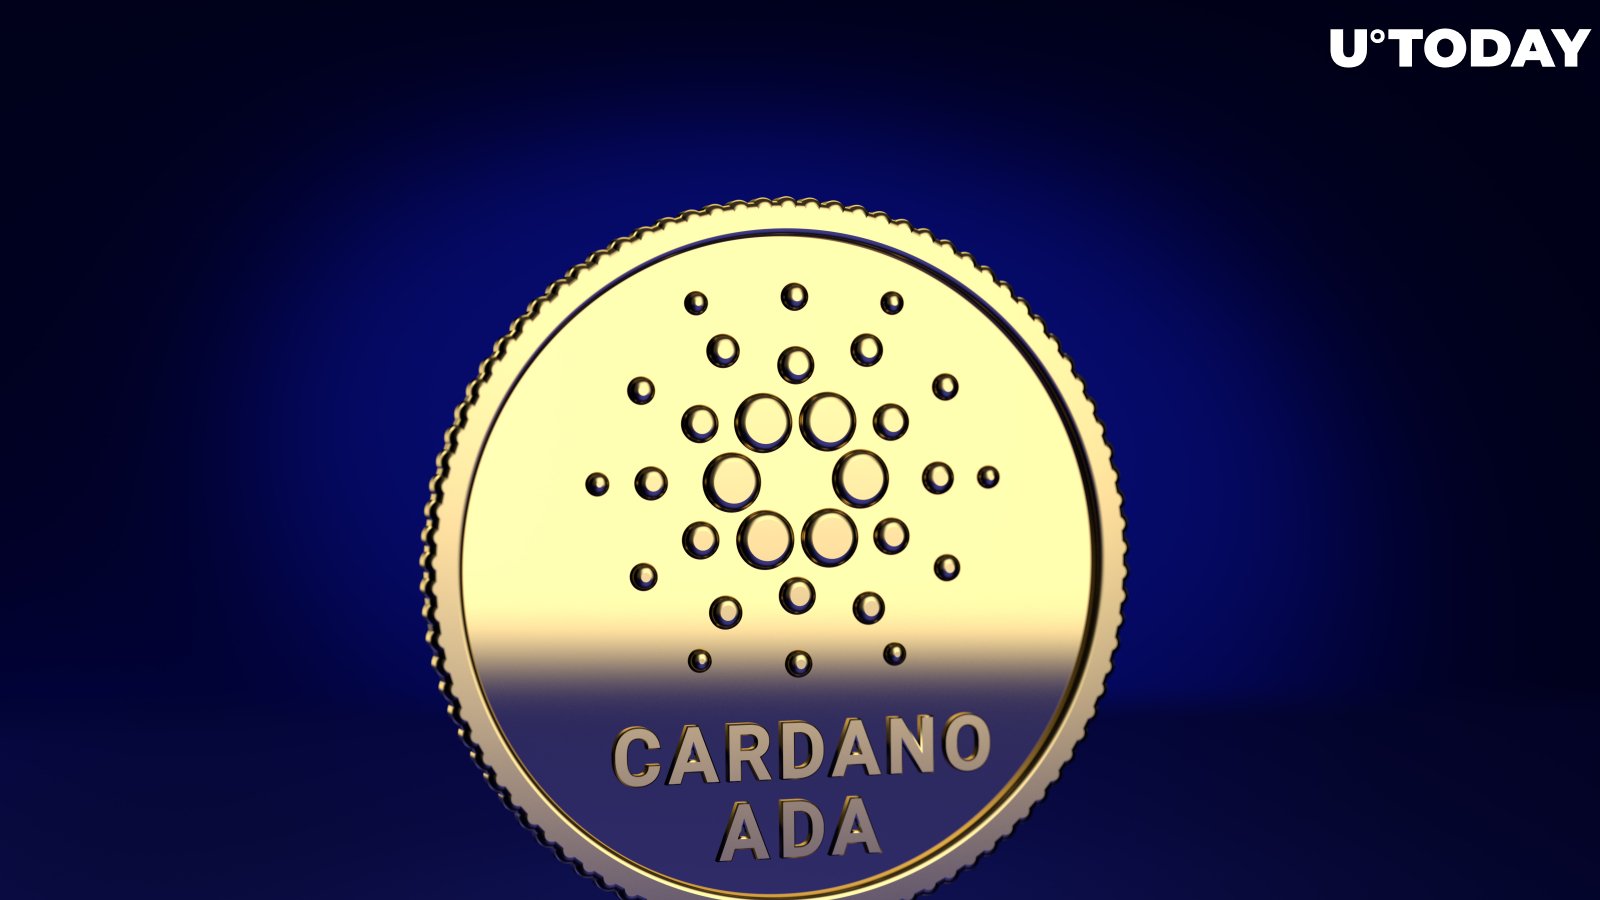 Cardano Tops Its 2018 High, Becoming Third-Biggest Cryptocurrency